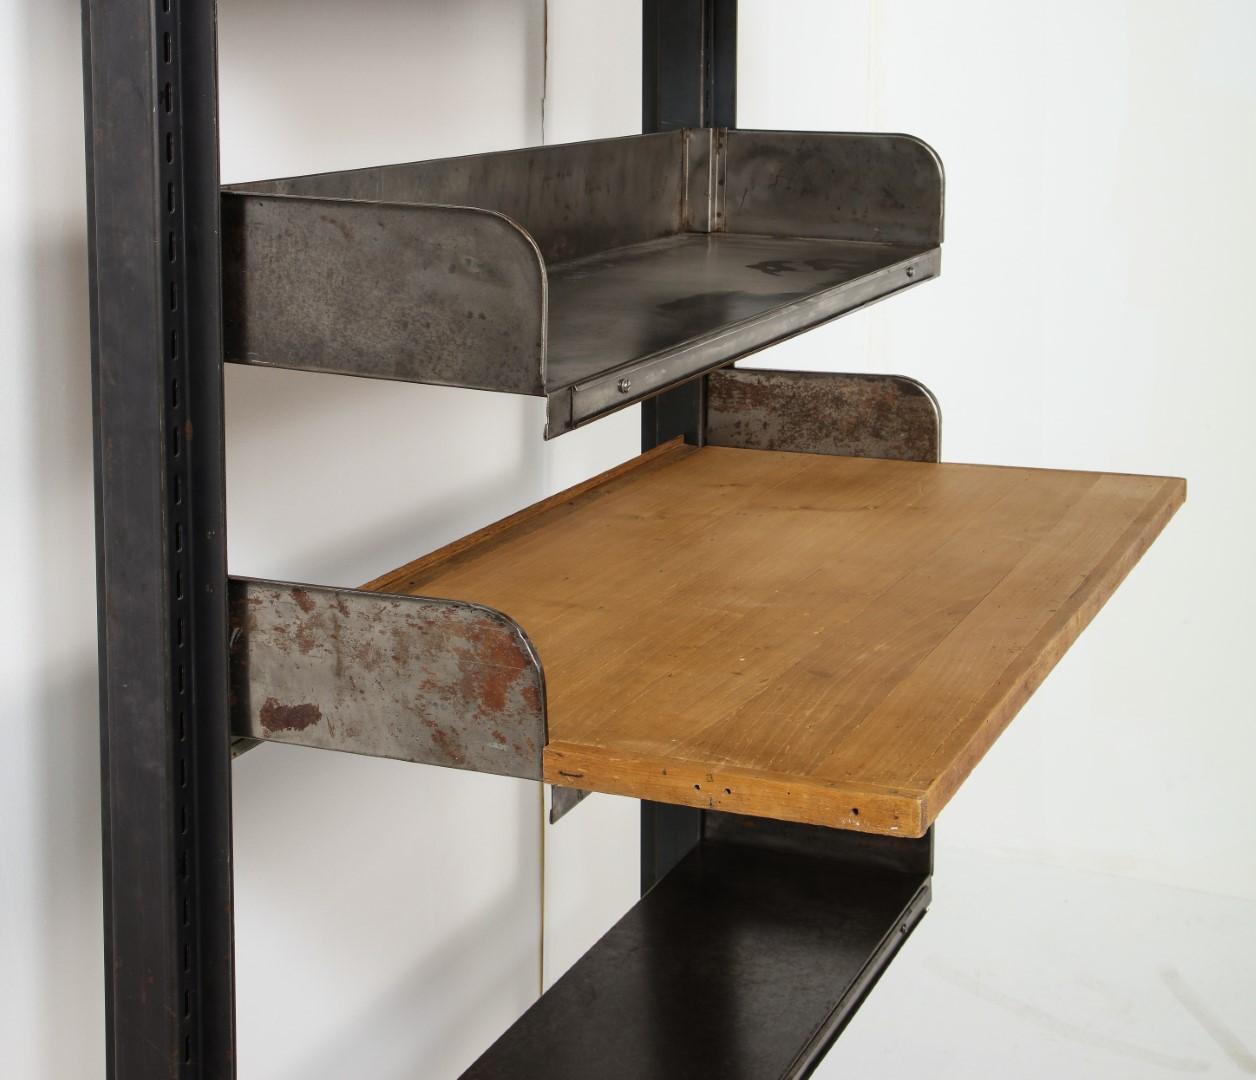 Midcentury French Industrial Iron Shelving System with Wood Desktop For Sale 8